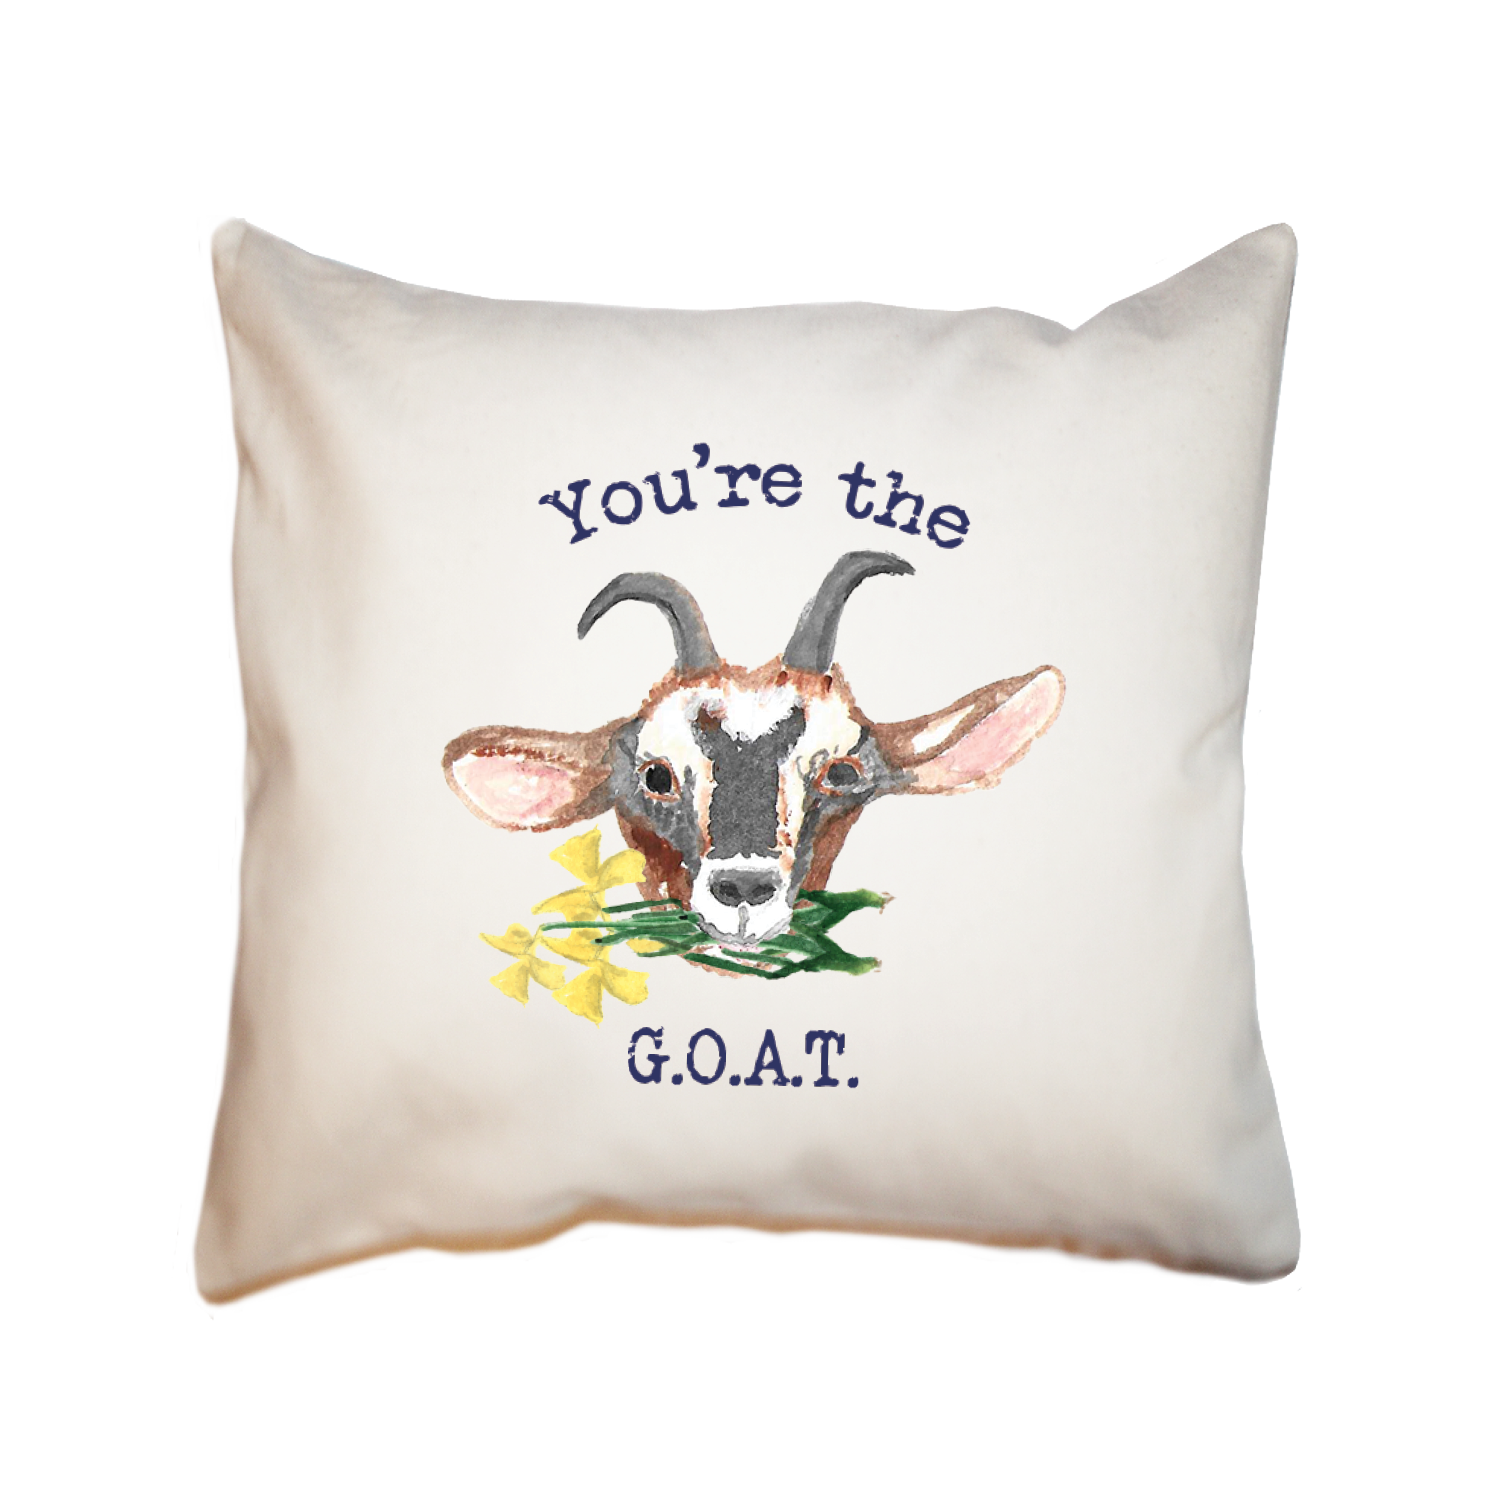 you're the goat square pillow